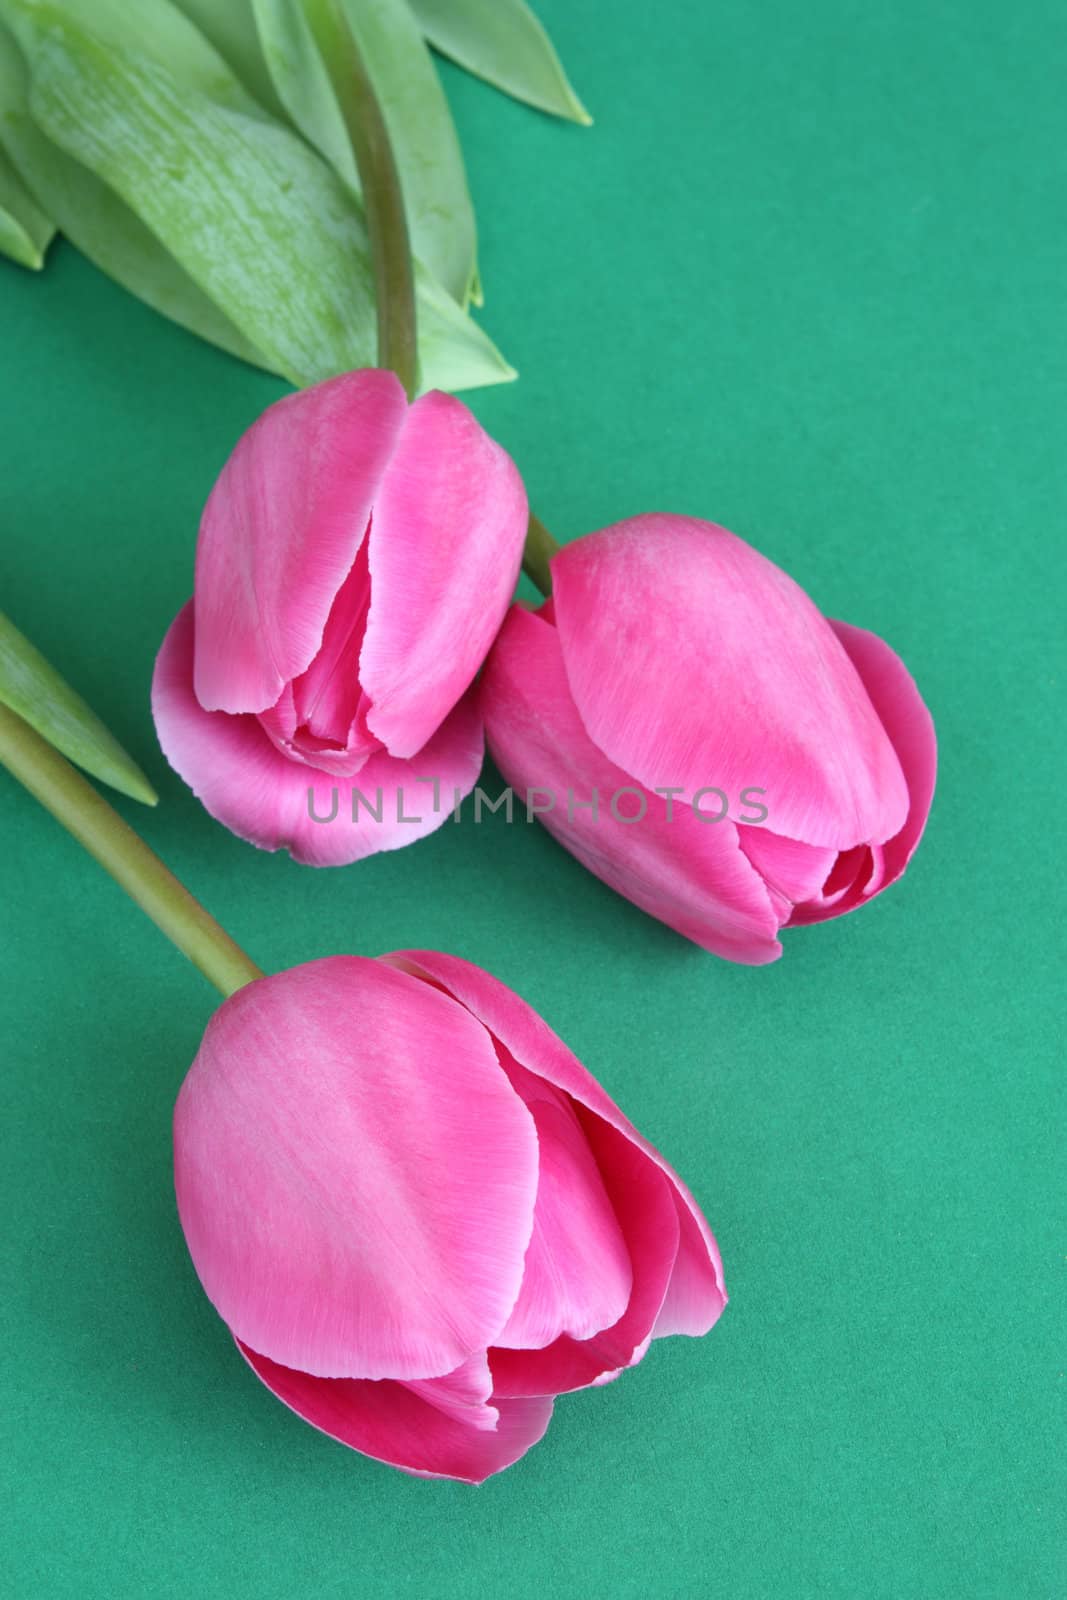 Pink tulips on green surface